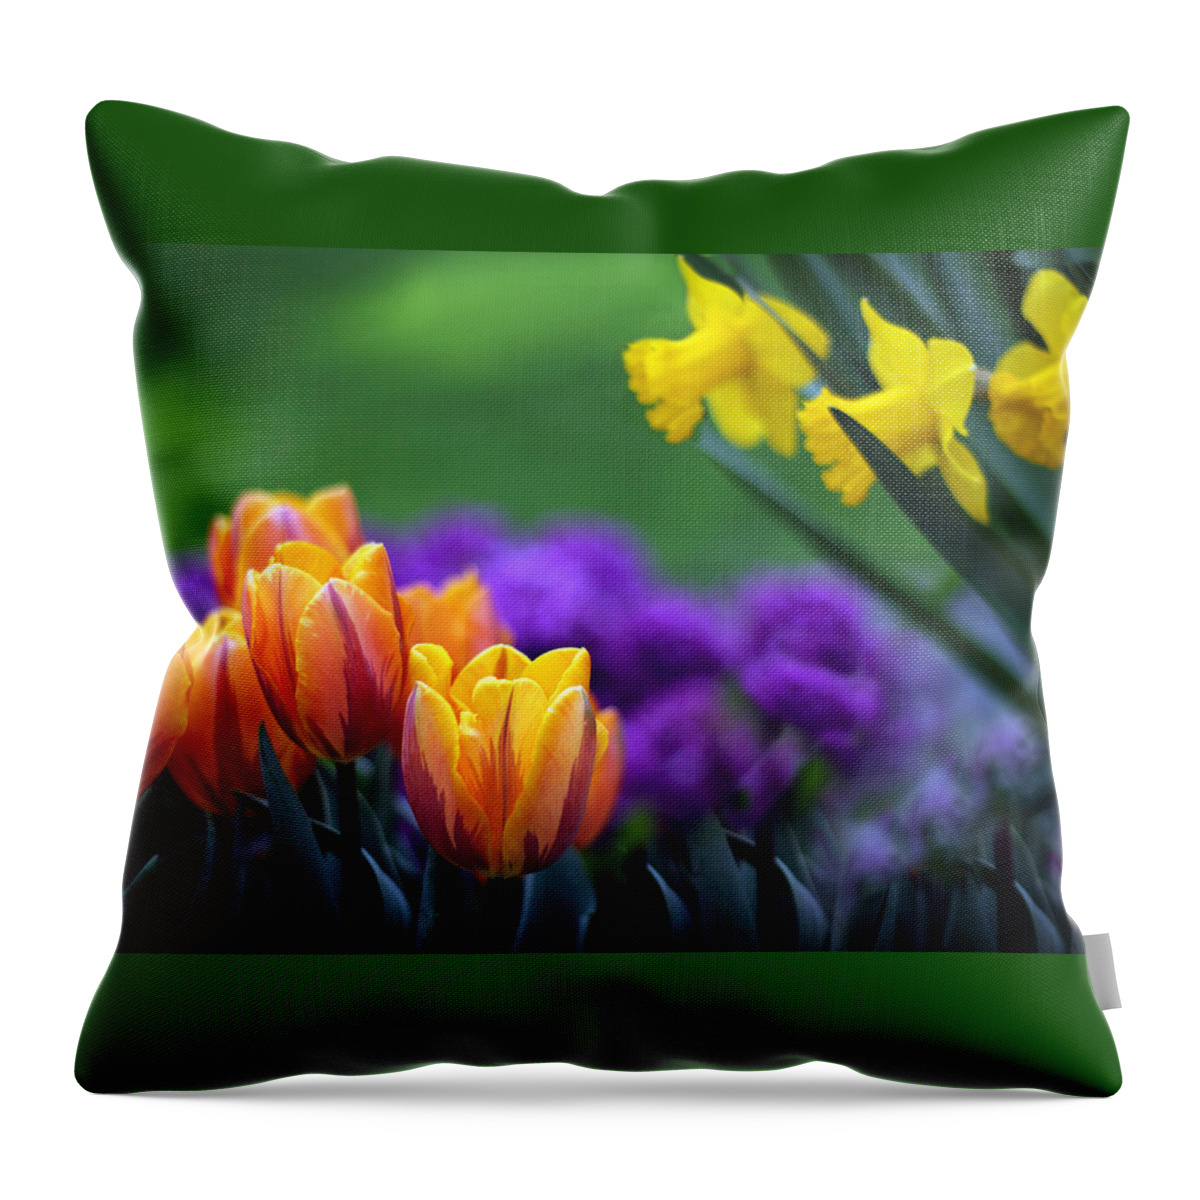 Tulips Throw Pillow featuring the photograph Glorious Garden by Jessica Jenney